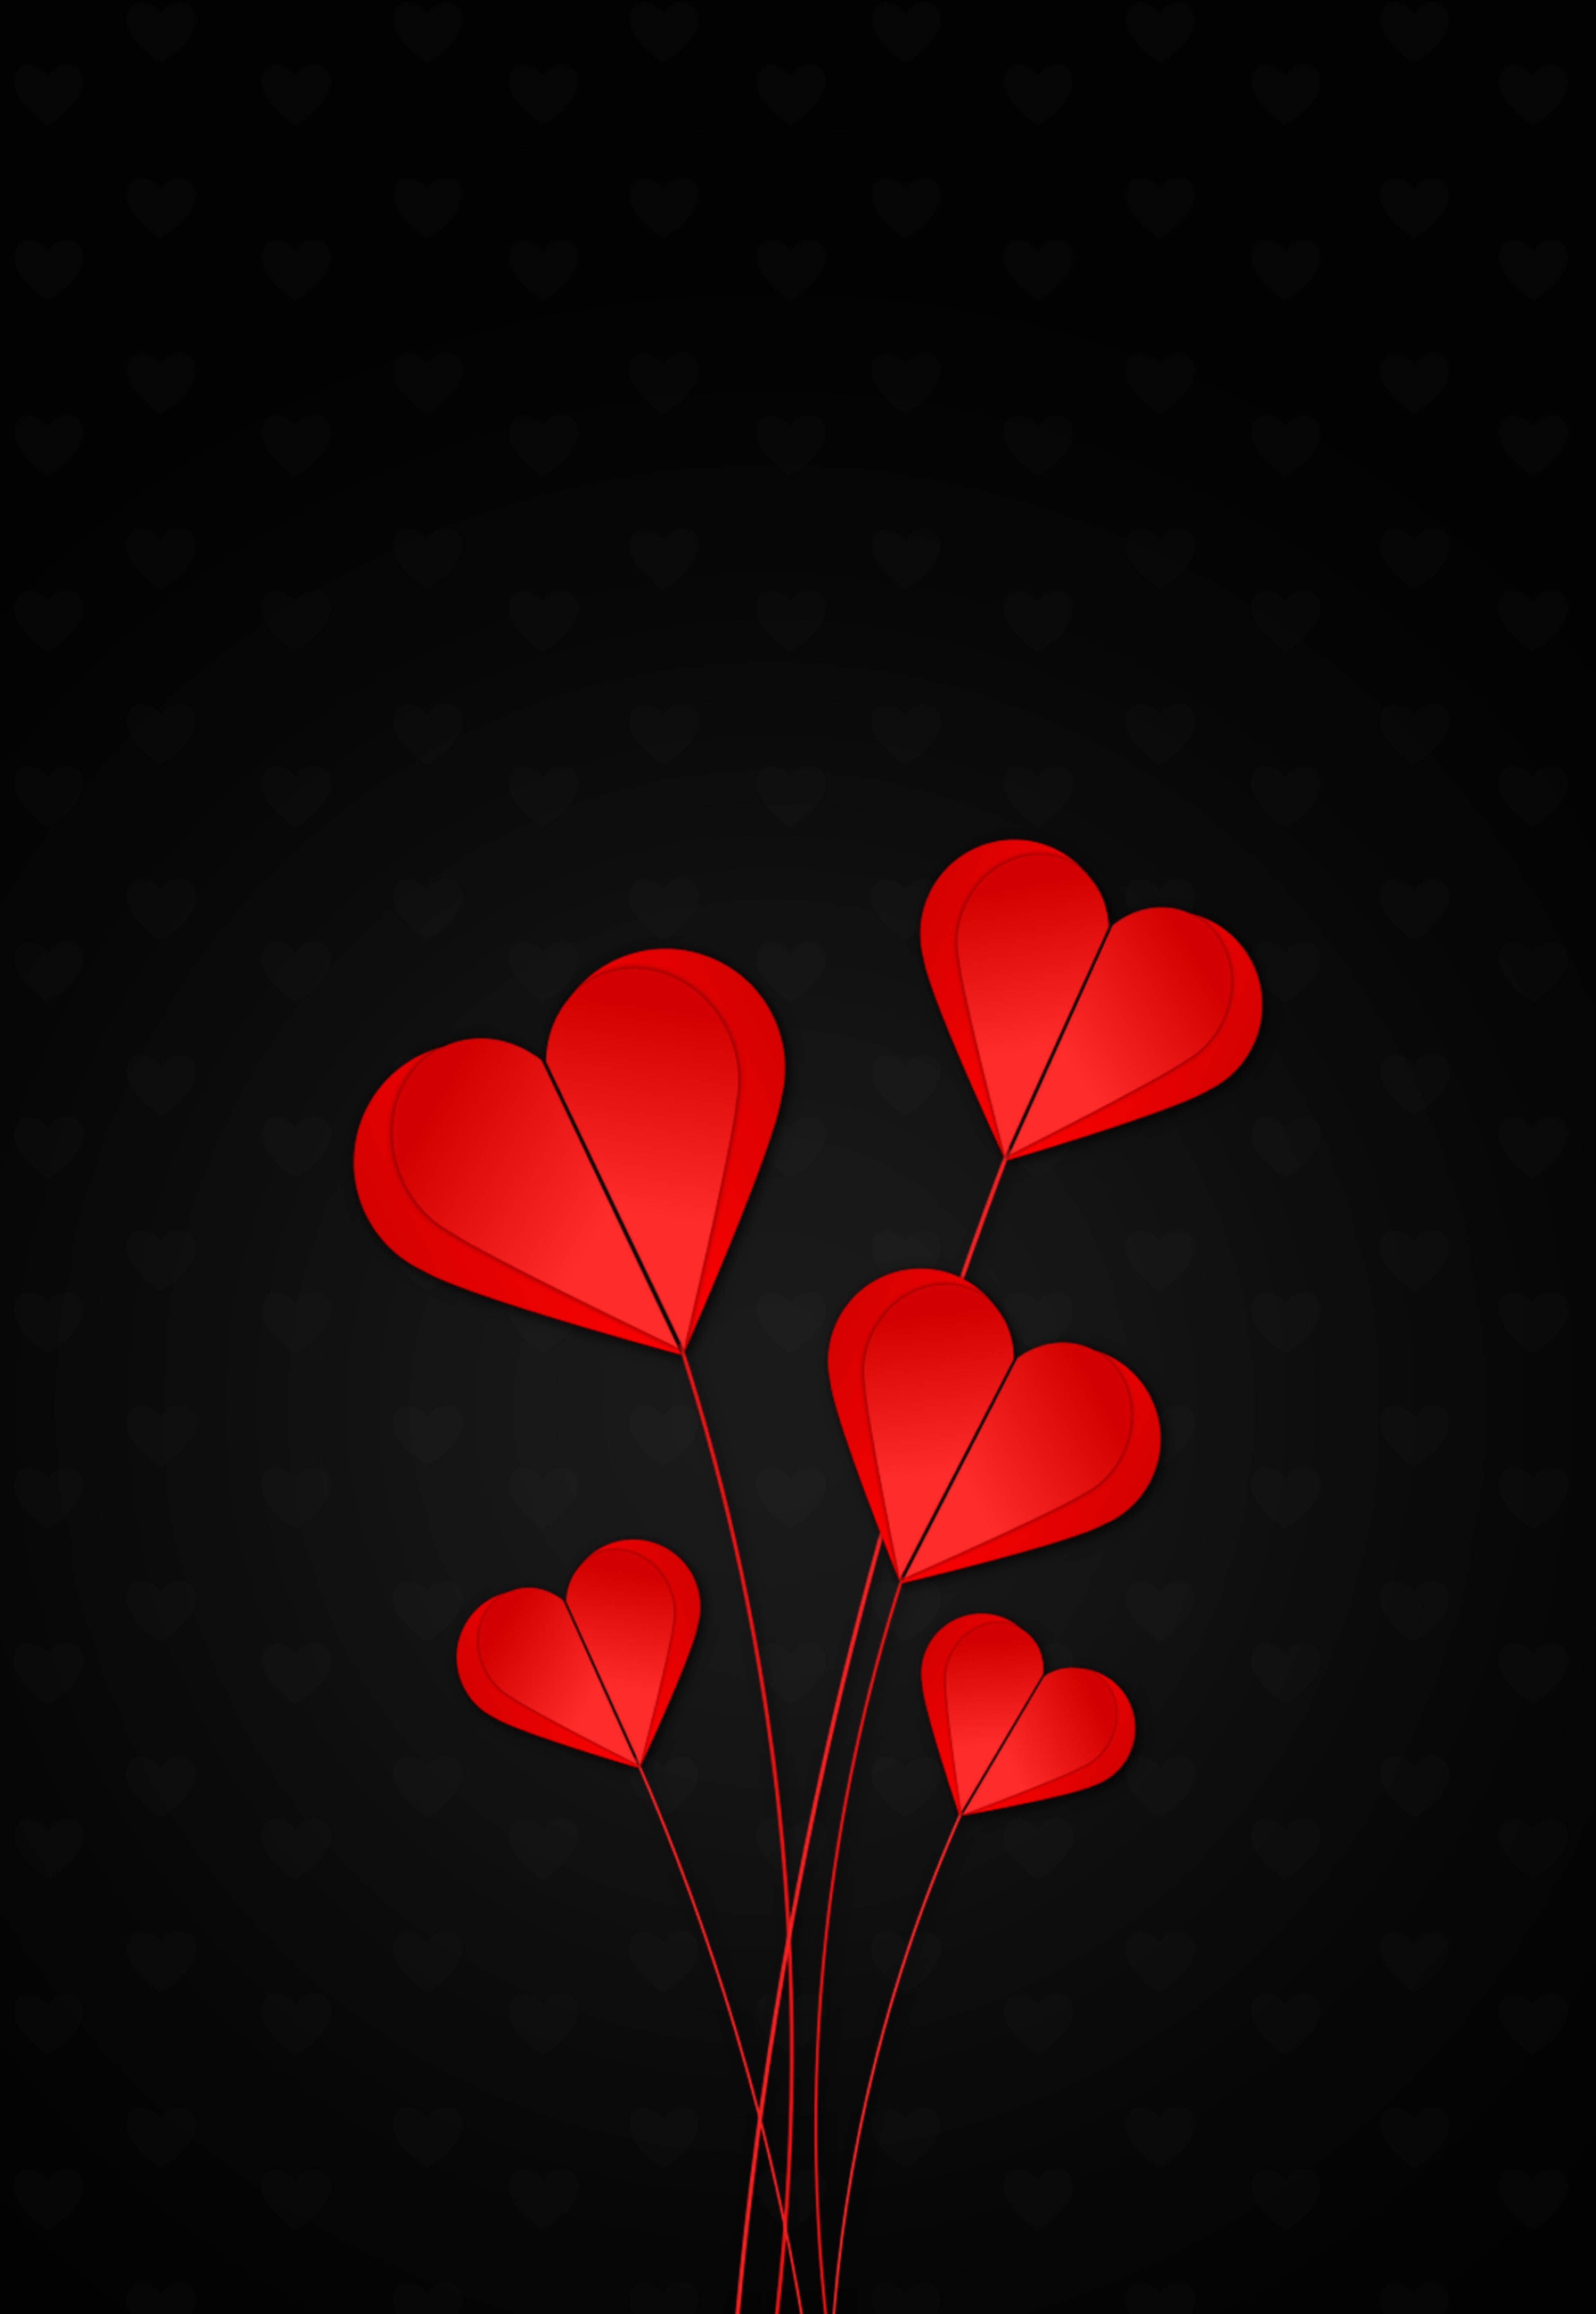 hearts, black background, love, red cell phone wallpapers